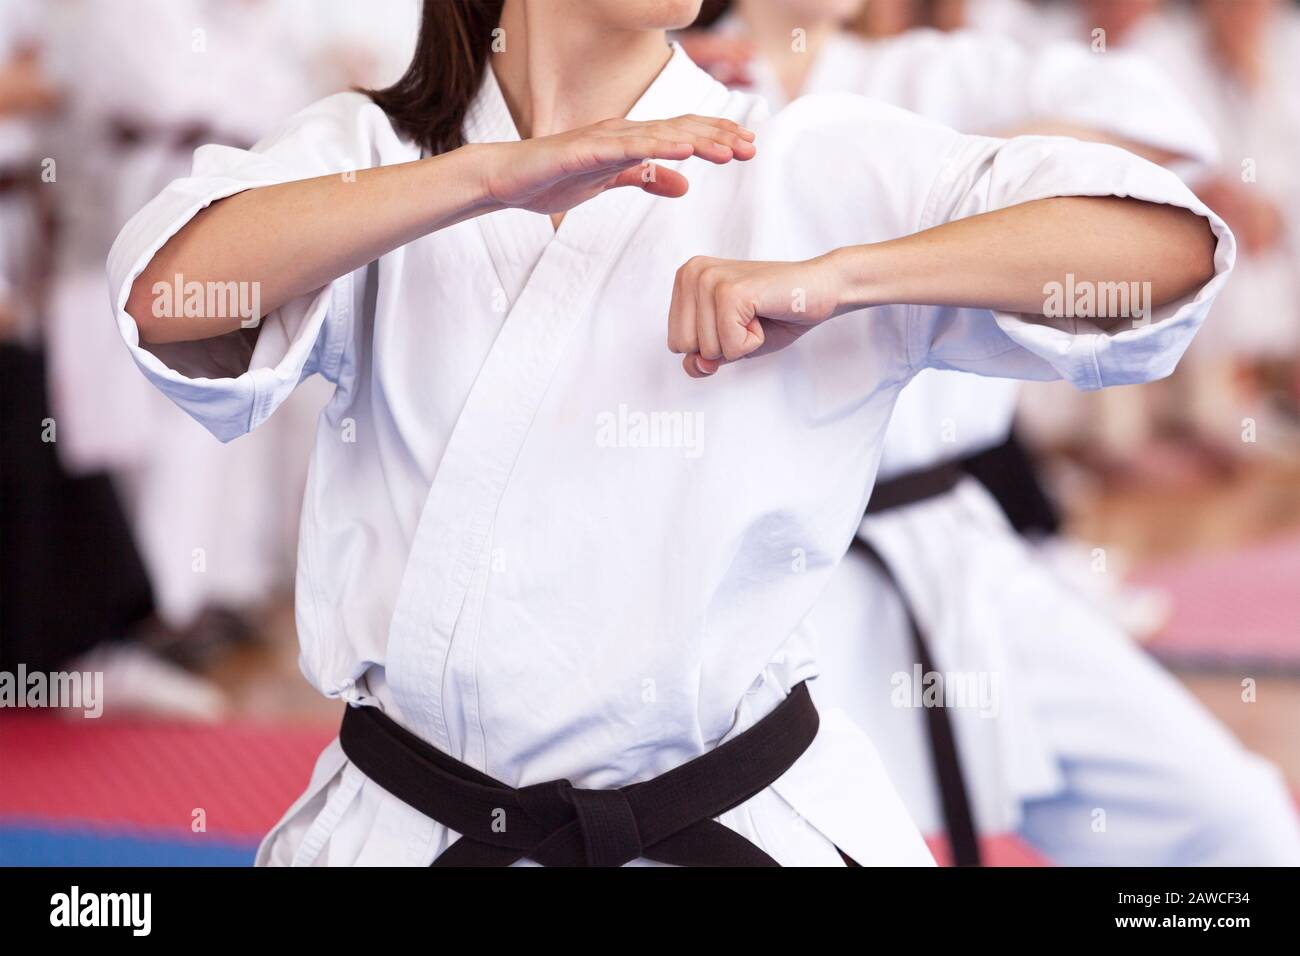 Female karate black belt practitioner body position during class Stock Photo